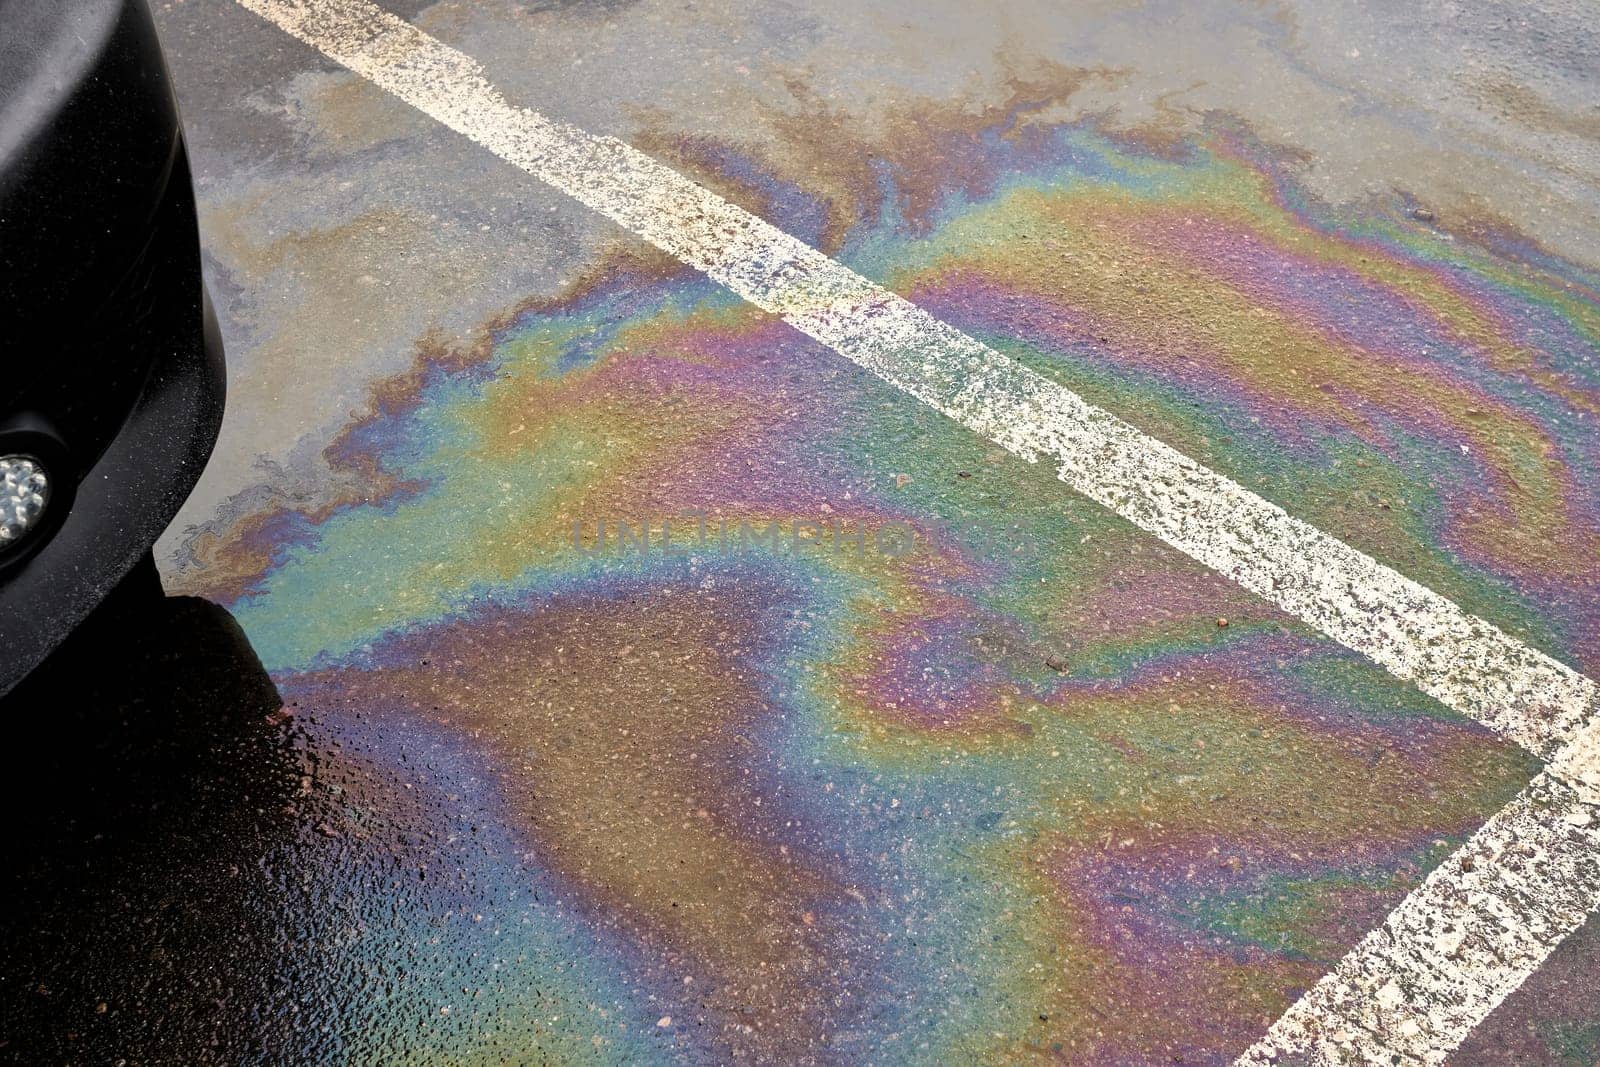 Colorful gas stain on wet asphalt. Oil stain or gasoline caused by a leak under a car. Environmental pollution concept.